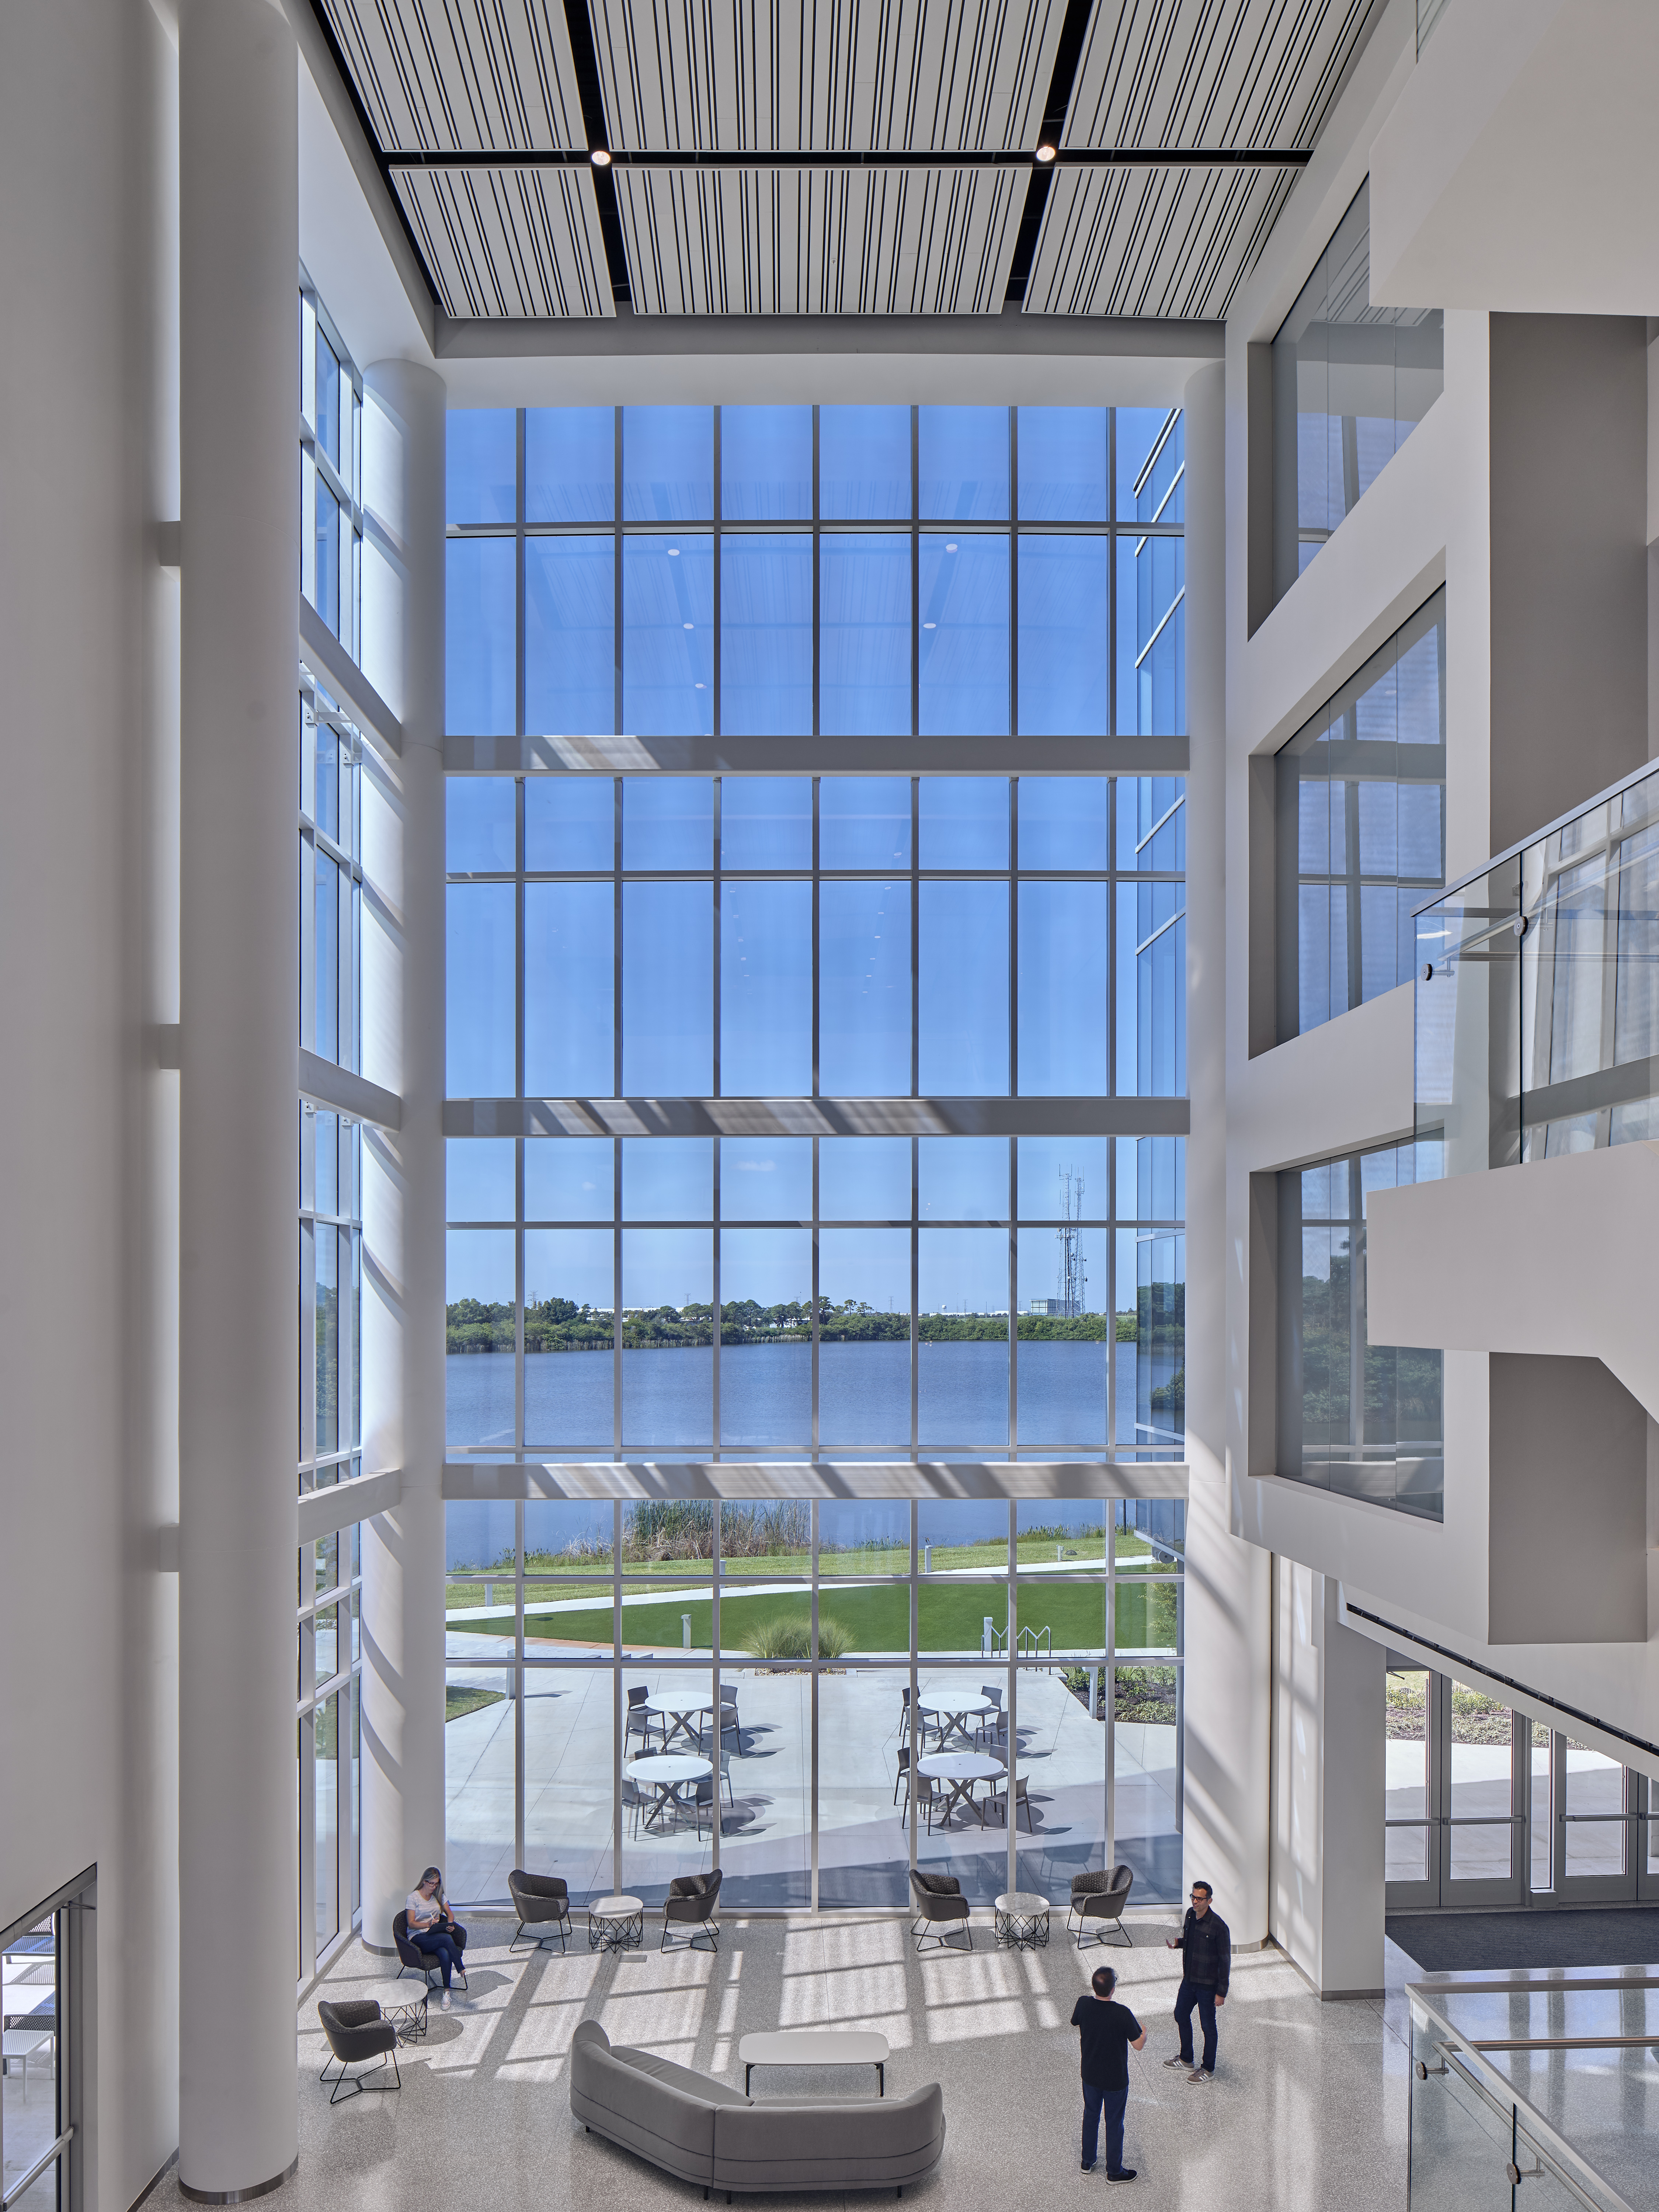 Electrochromic glass, or smart windows, tint and clear in response to sunlight